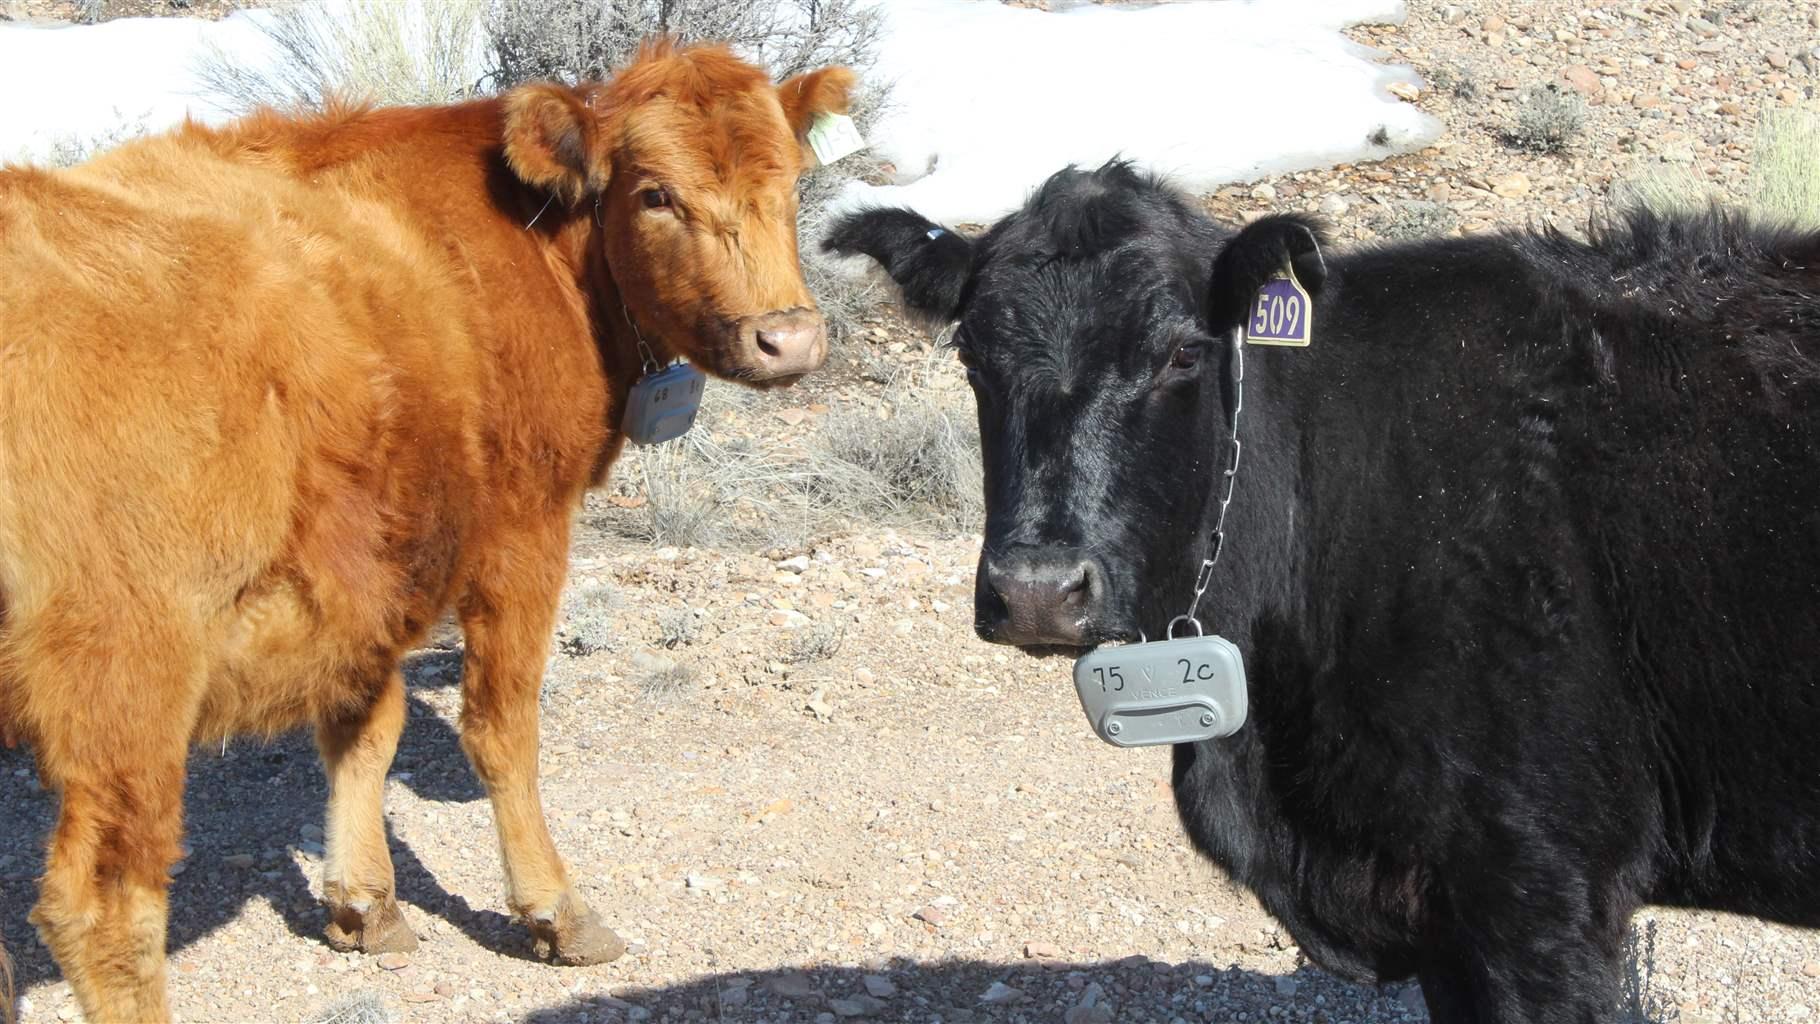 Two cows—one light brown and one black and both wearing collars that include small grey electronic transmission units—stand looking at the camera in a close-up shot. Only some dry, rocky ground, a very small bush, and part of a patch of snow are visible in the background.